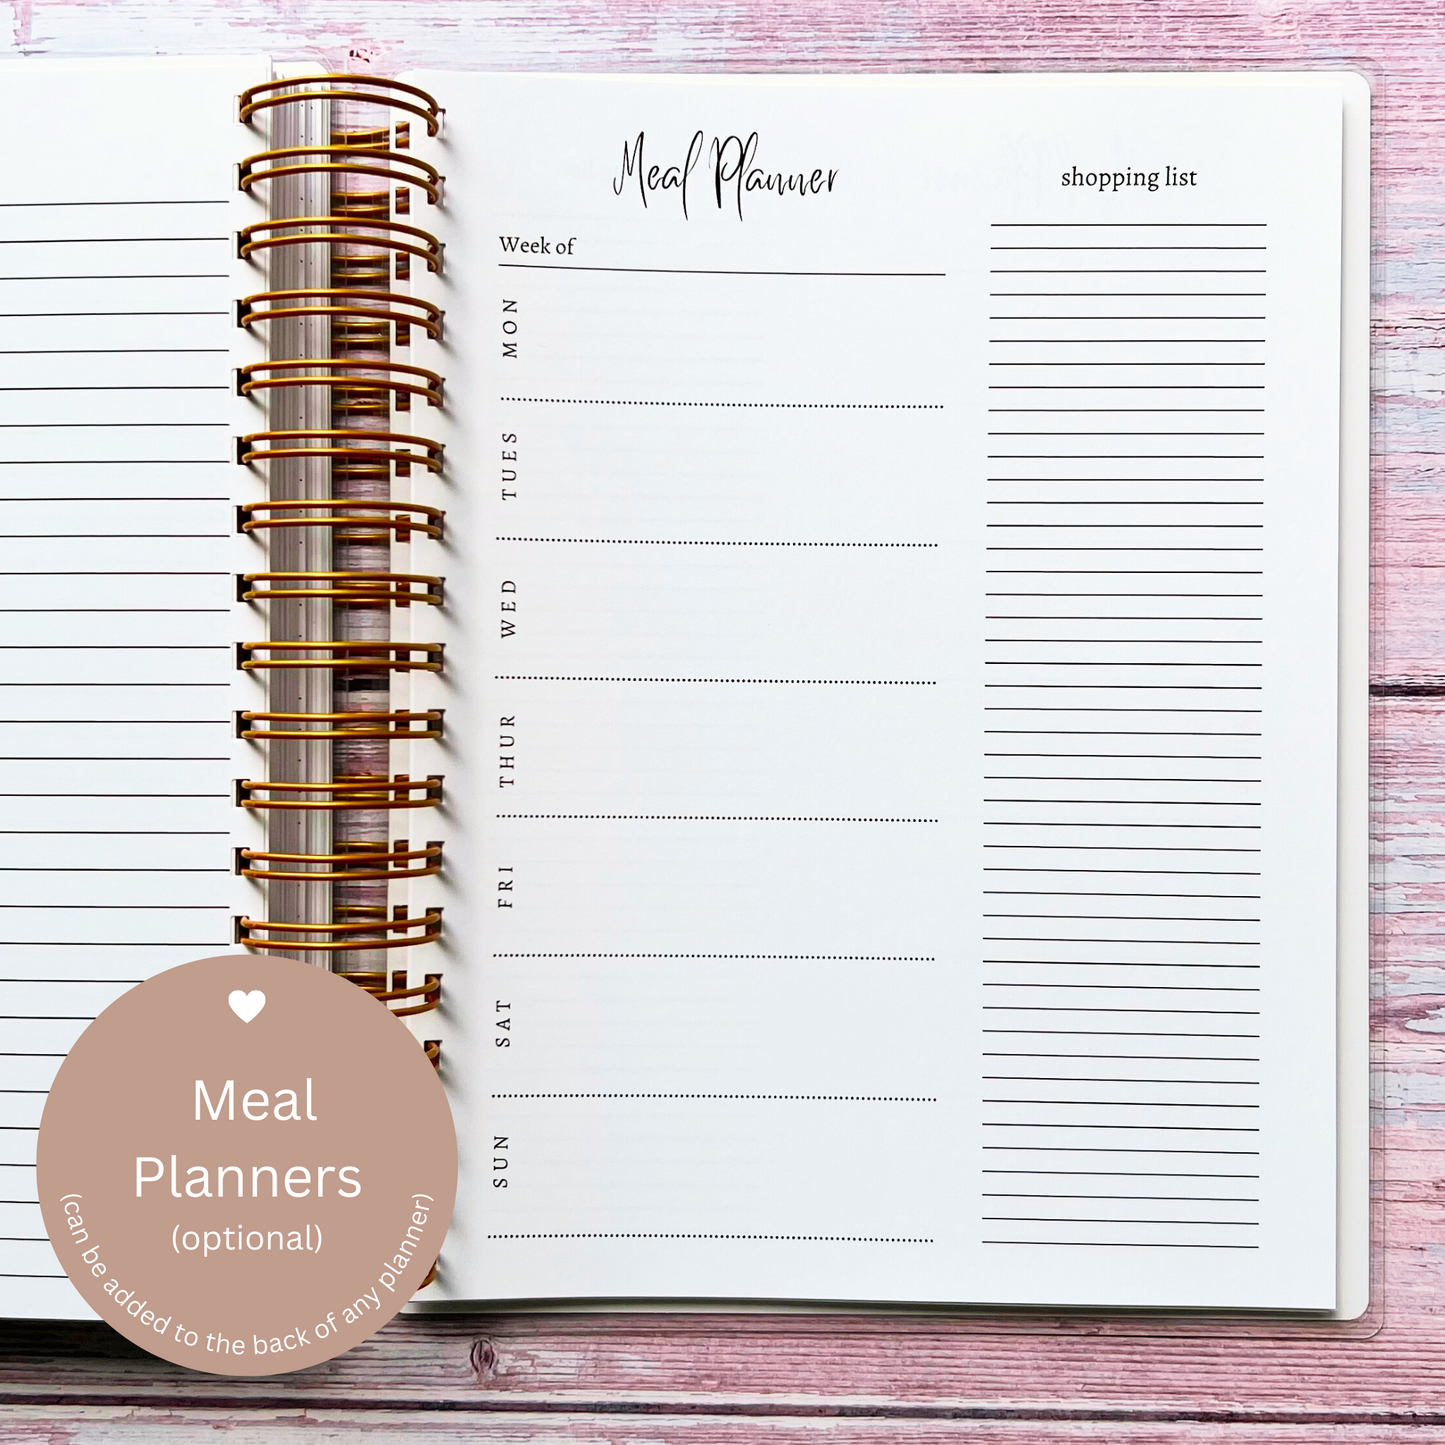 Personalized Weekly Planner | Planner Chick